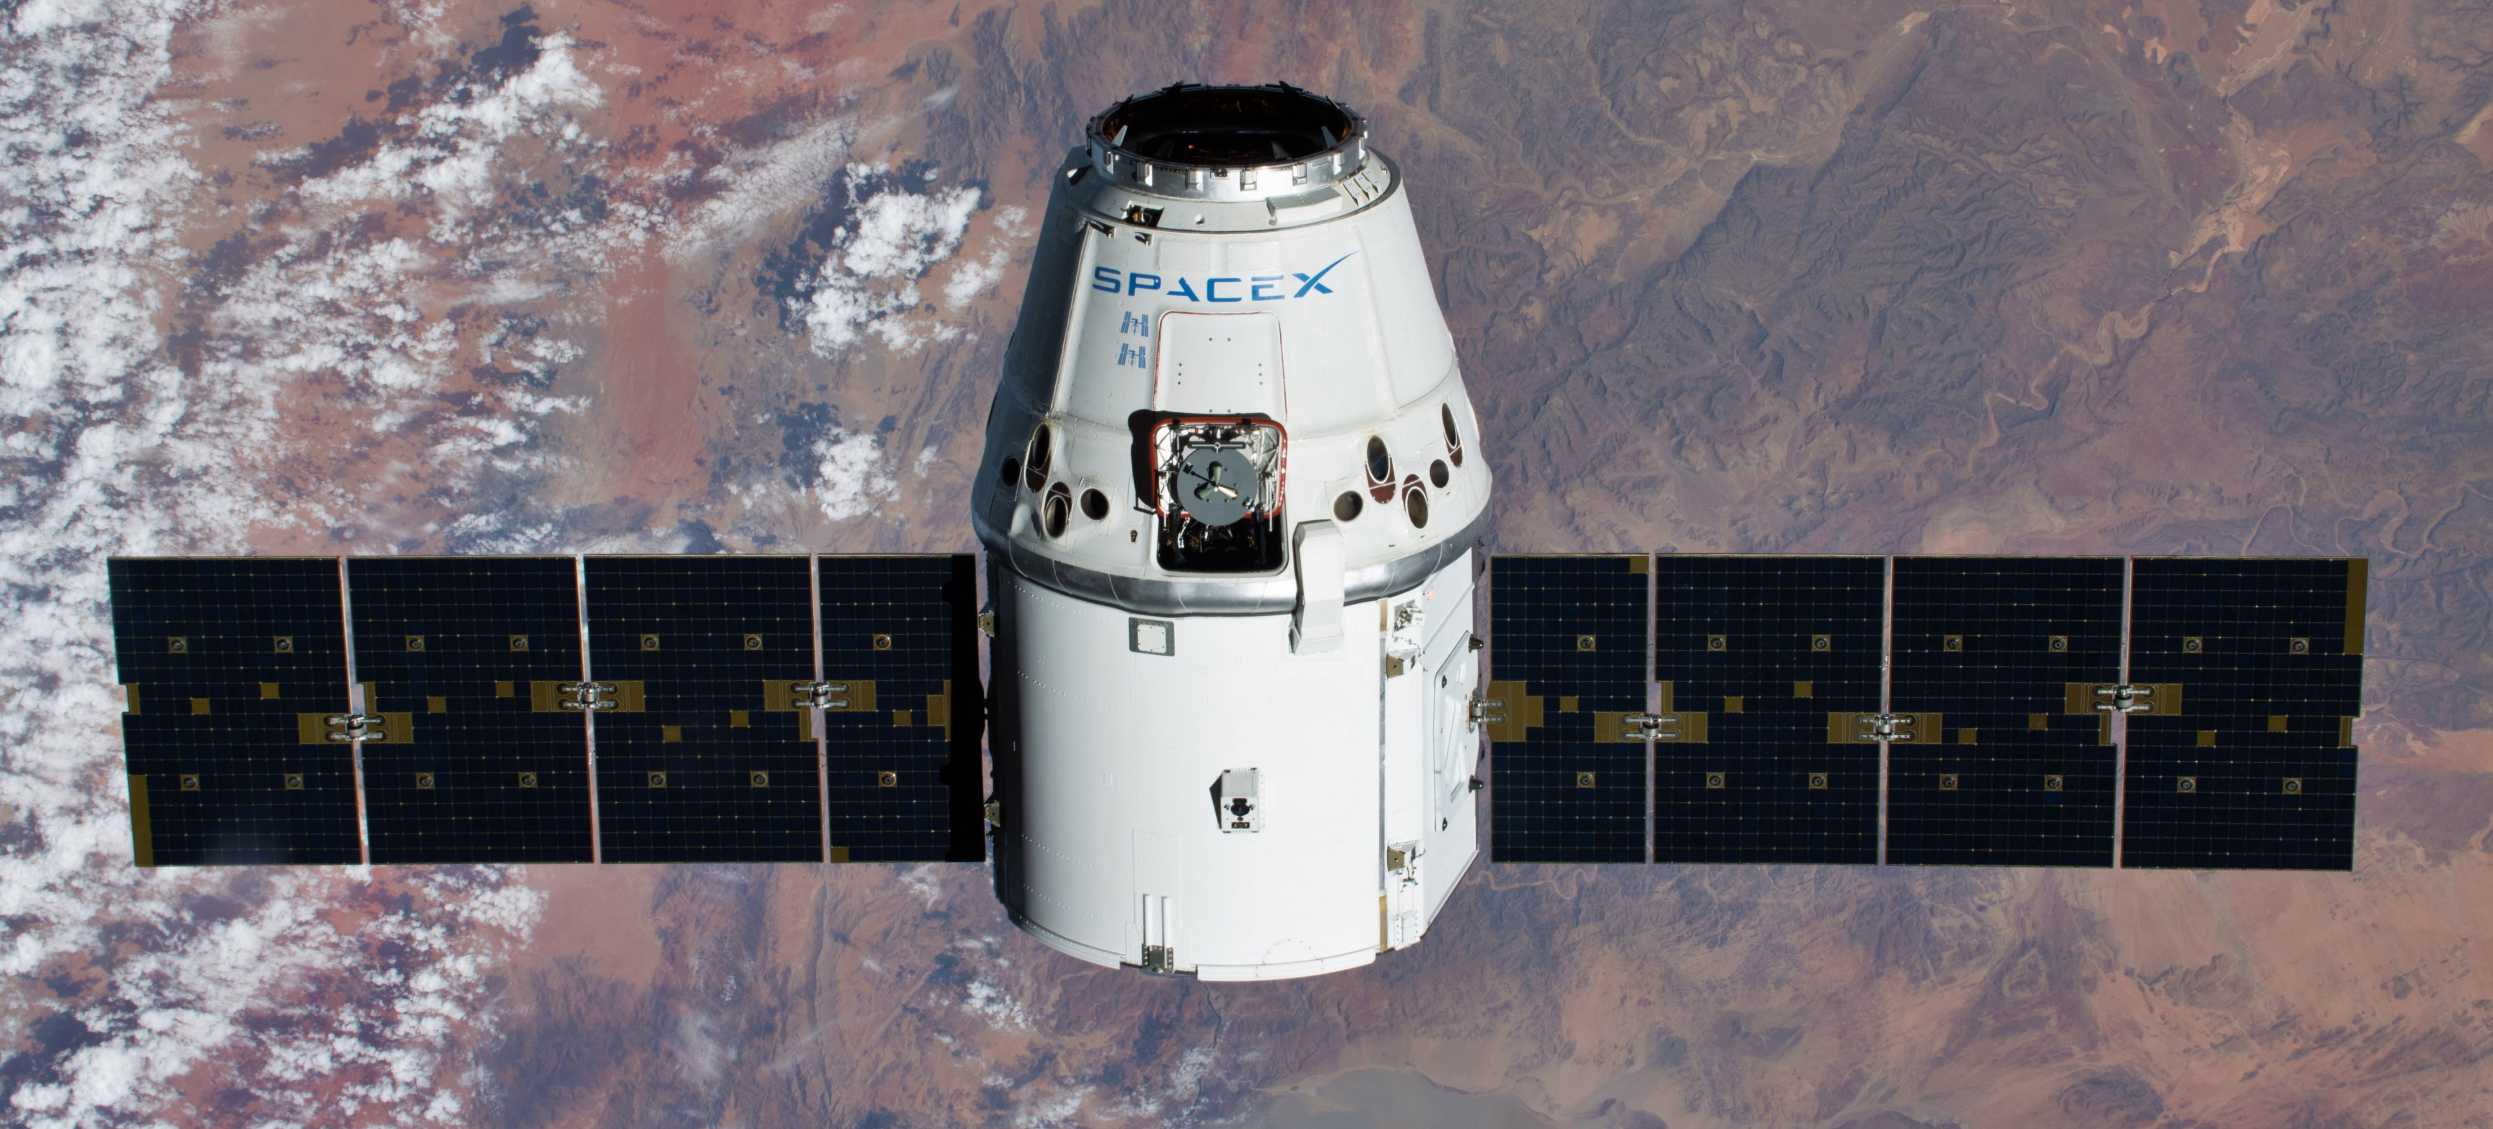 CRS-20 Cargo Dragon C112 ISS arrival 030920 (NASA) 3 crop (c)